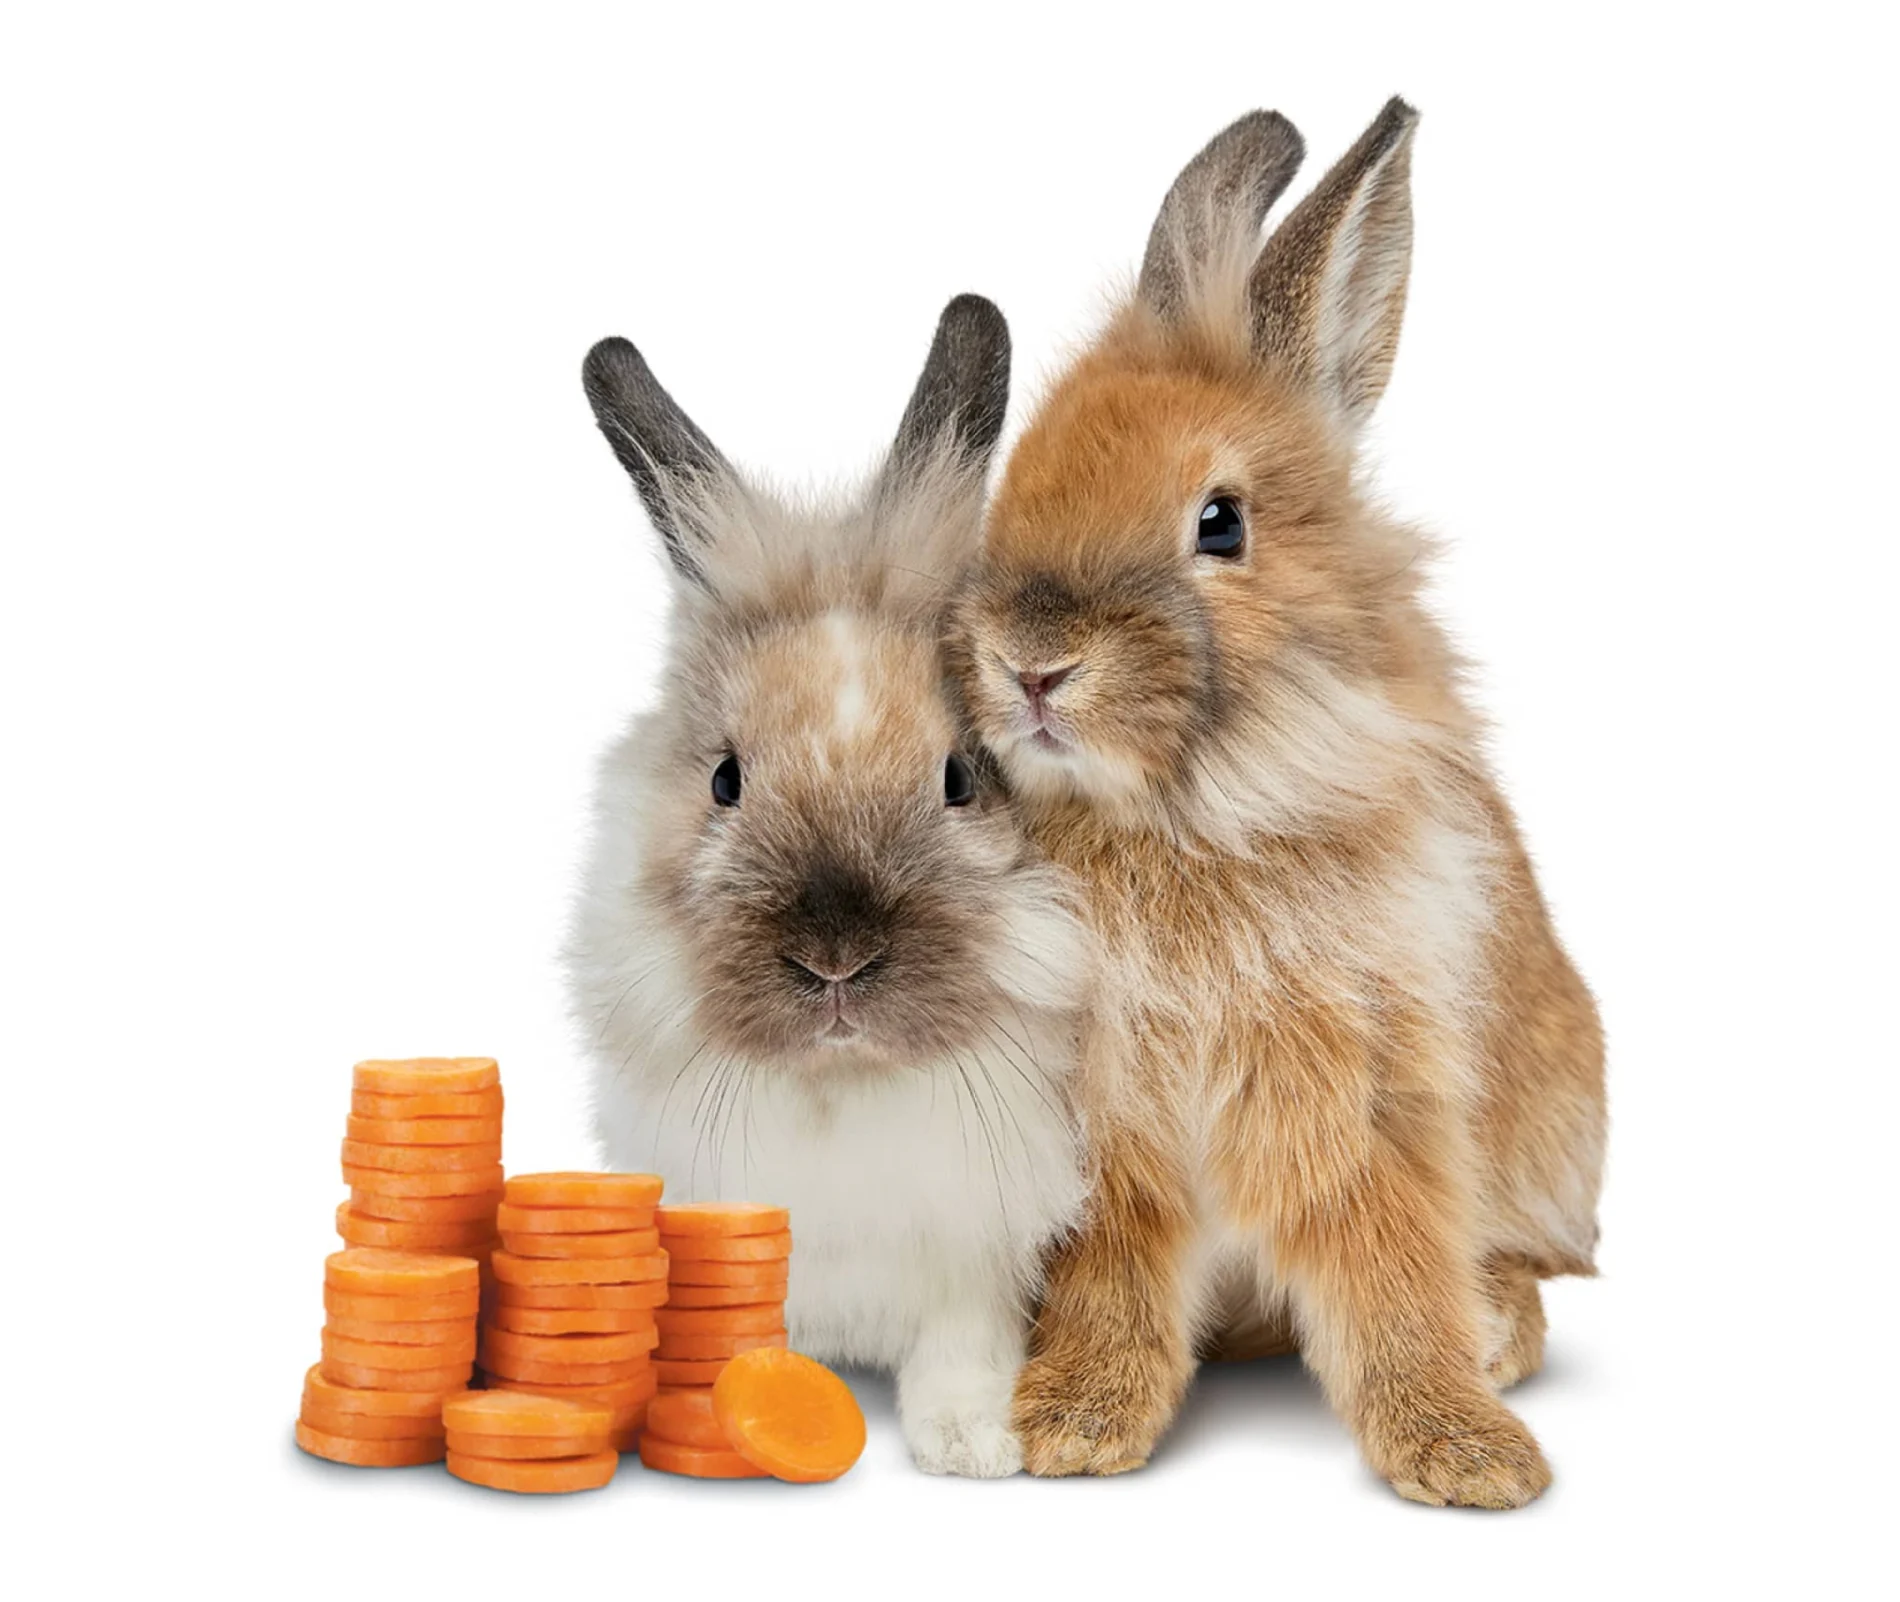 Bunnies with carrots that look like coins.